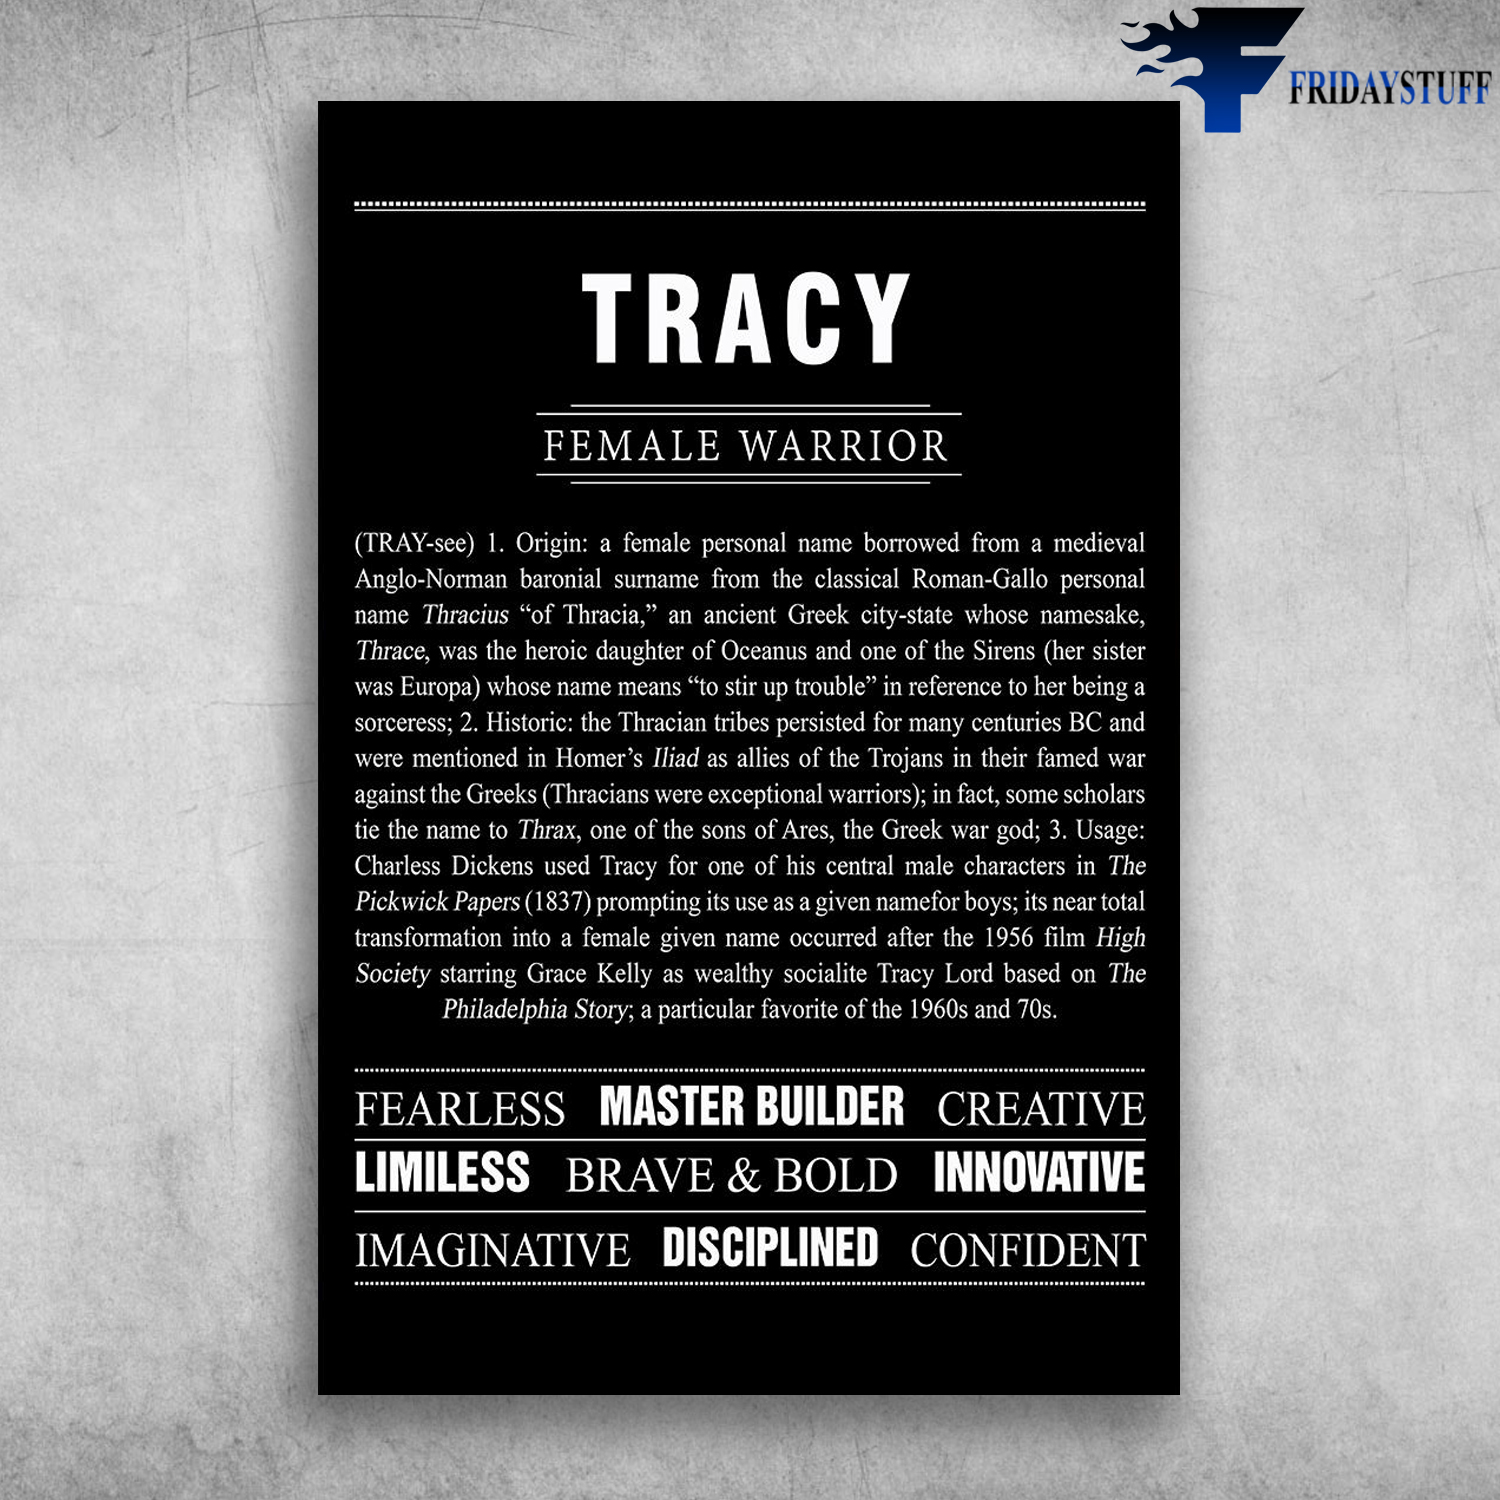 Tracy Female Warrior Fearless Creative Confident